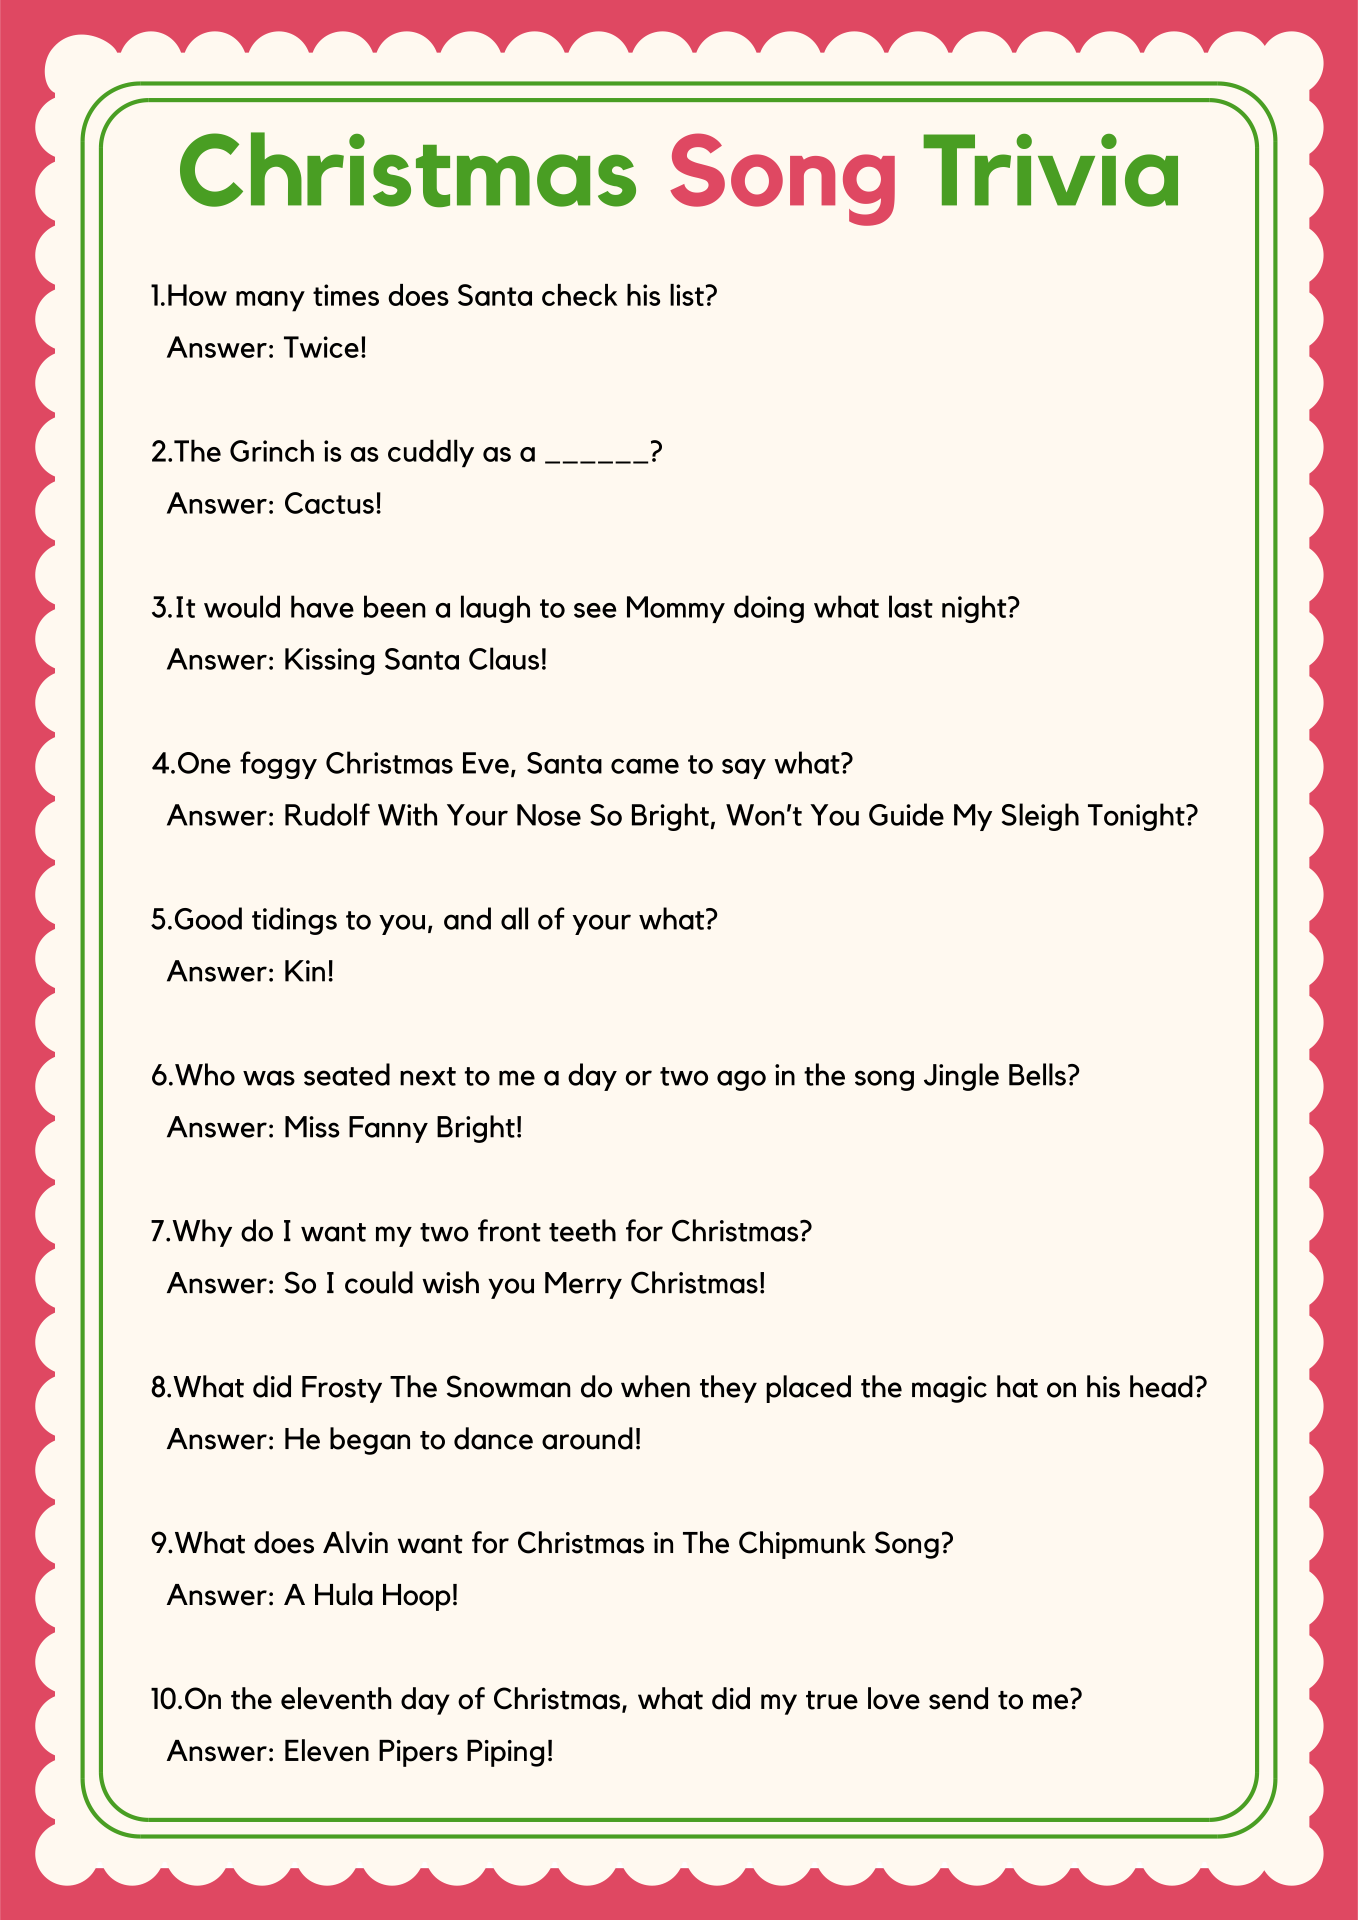 easy-christmas-trivia-questions-and-answers-printable-web-let-the